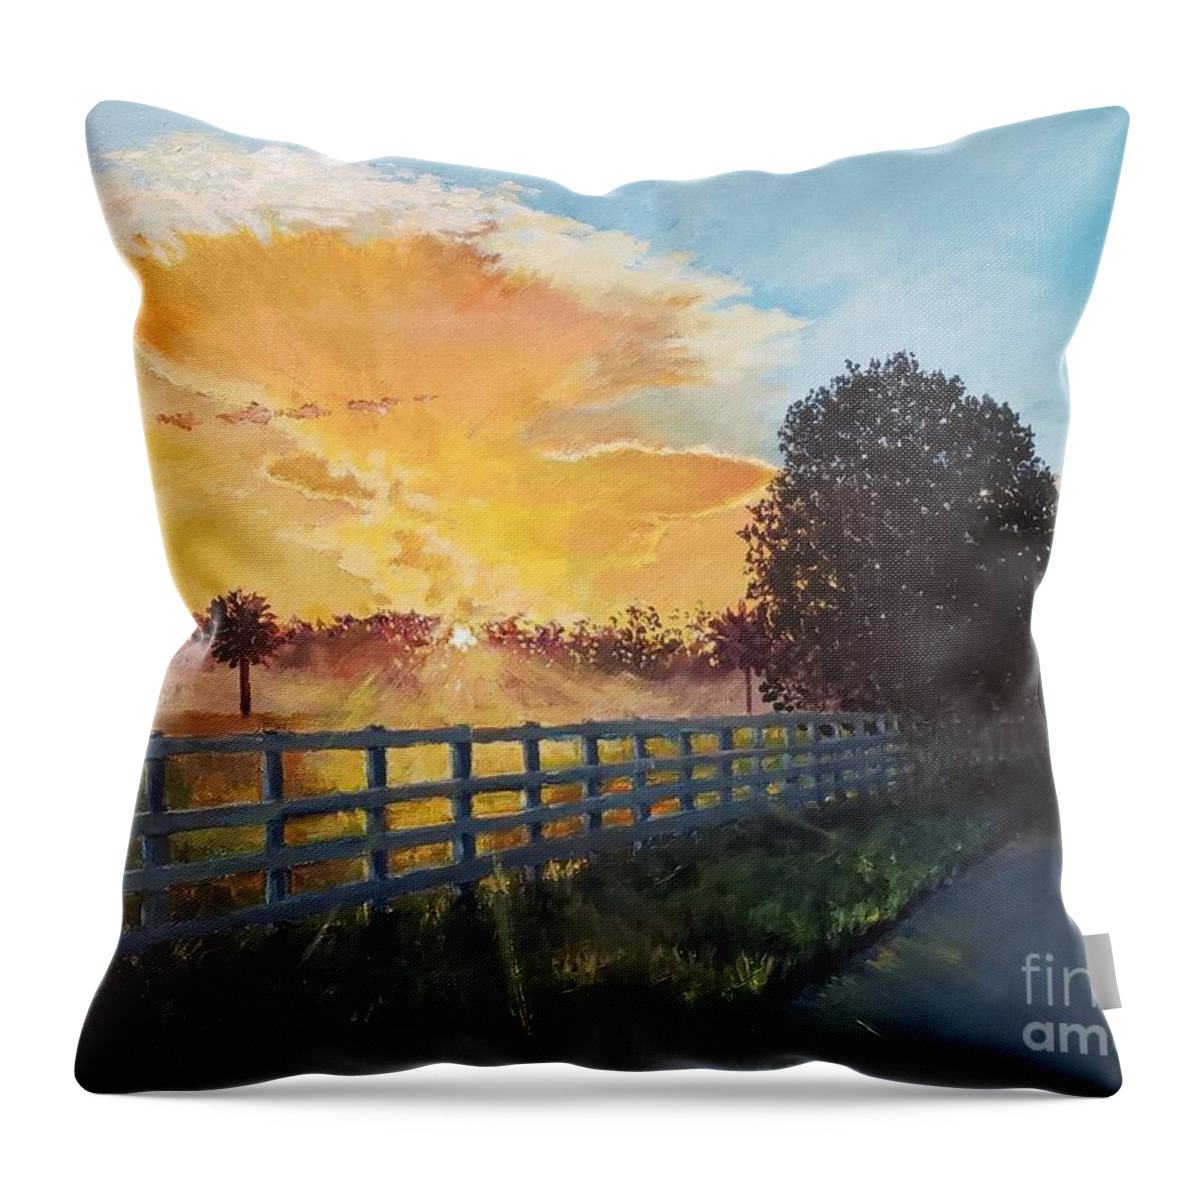 Fence Throw Pillow featuring the painting Summer Sunrise by Merana Cadorette